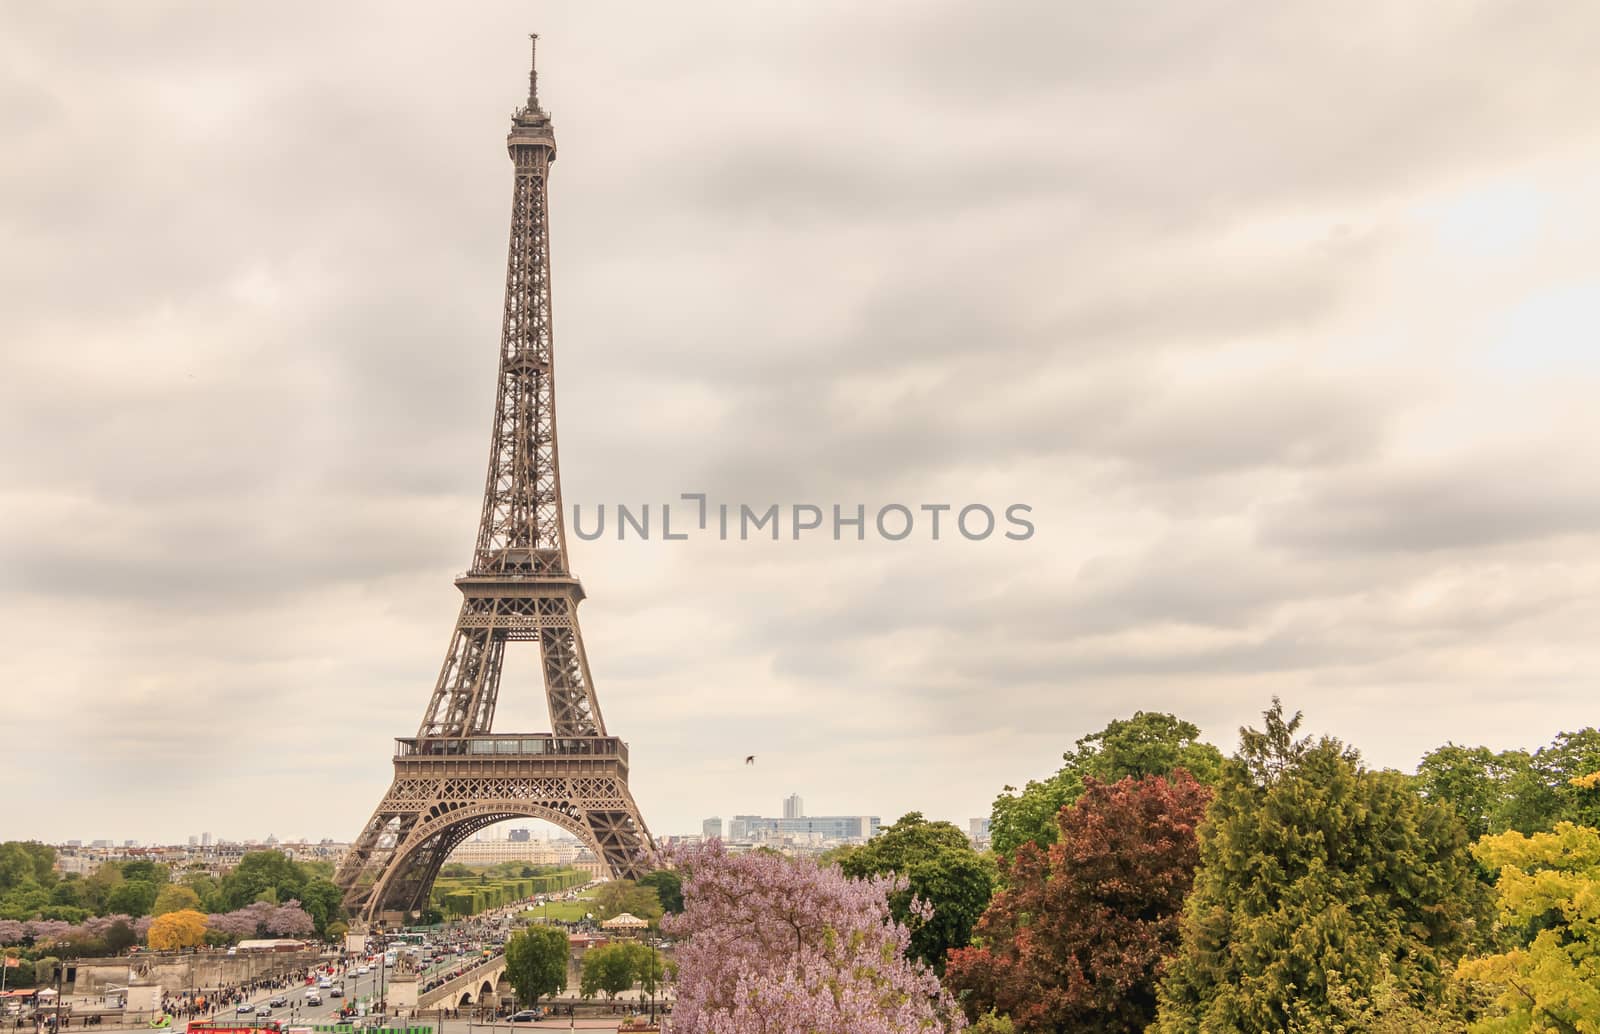 Eiffel Tower in Paris, France in bad weather by AtlanticEUROSTOXX